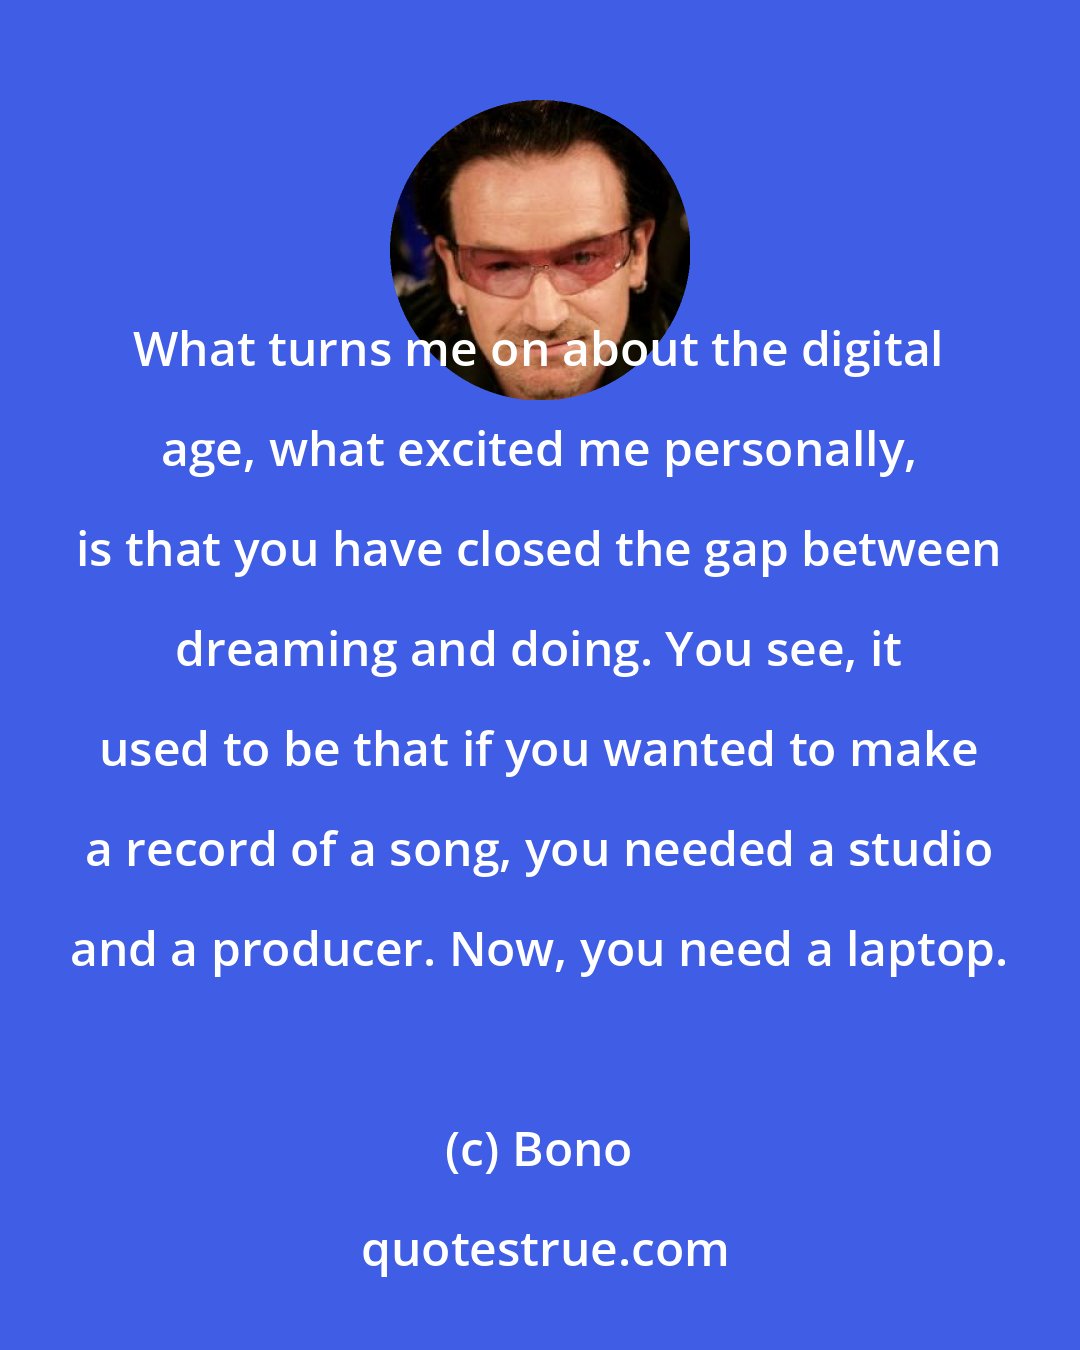 Bono: What turns me on about the digital age, what excited me personally, is that you have closed the gap between dreaming and doing. You see, it used to be that if you wanted to make a record of a song, you needed a studio and a producer. Now, you need a laptop.